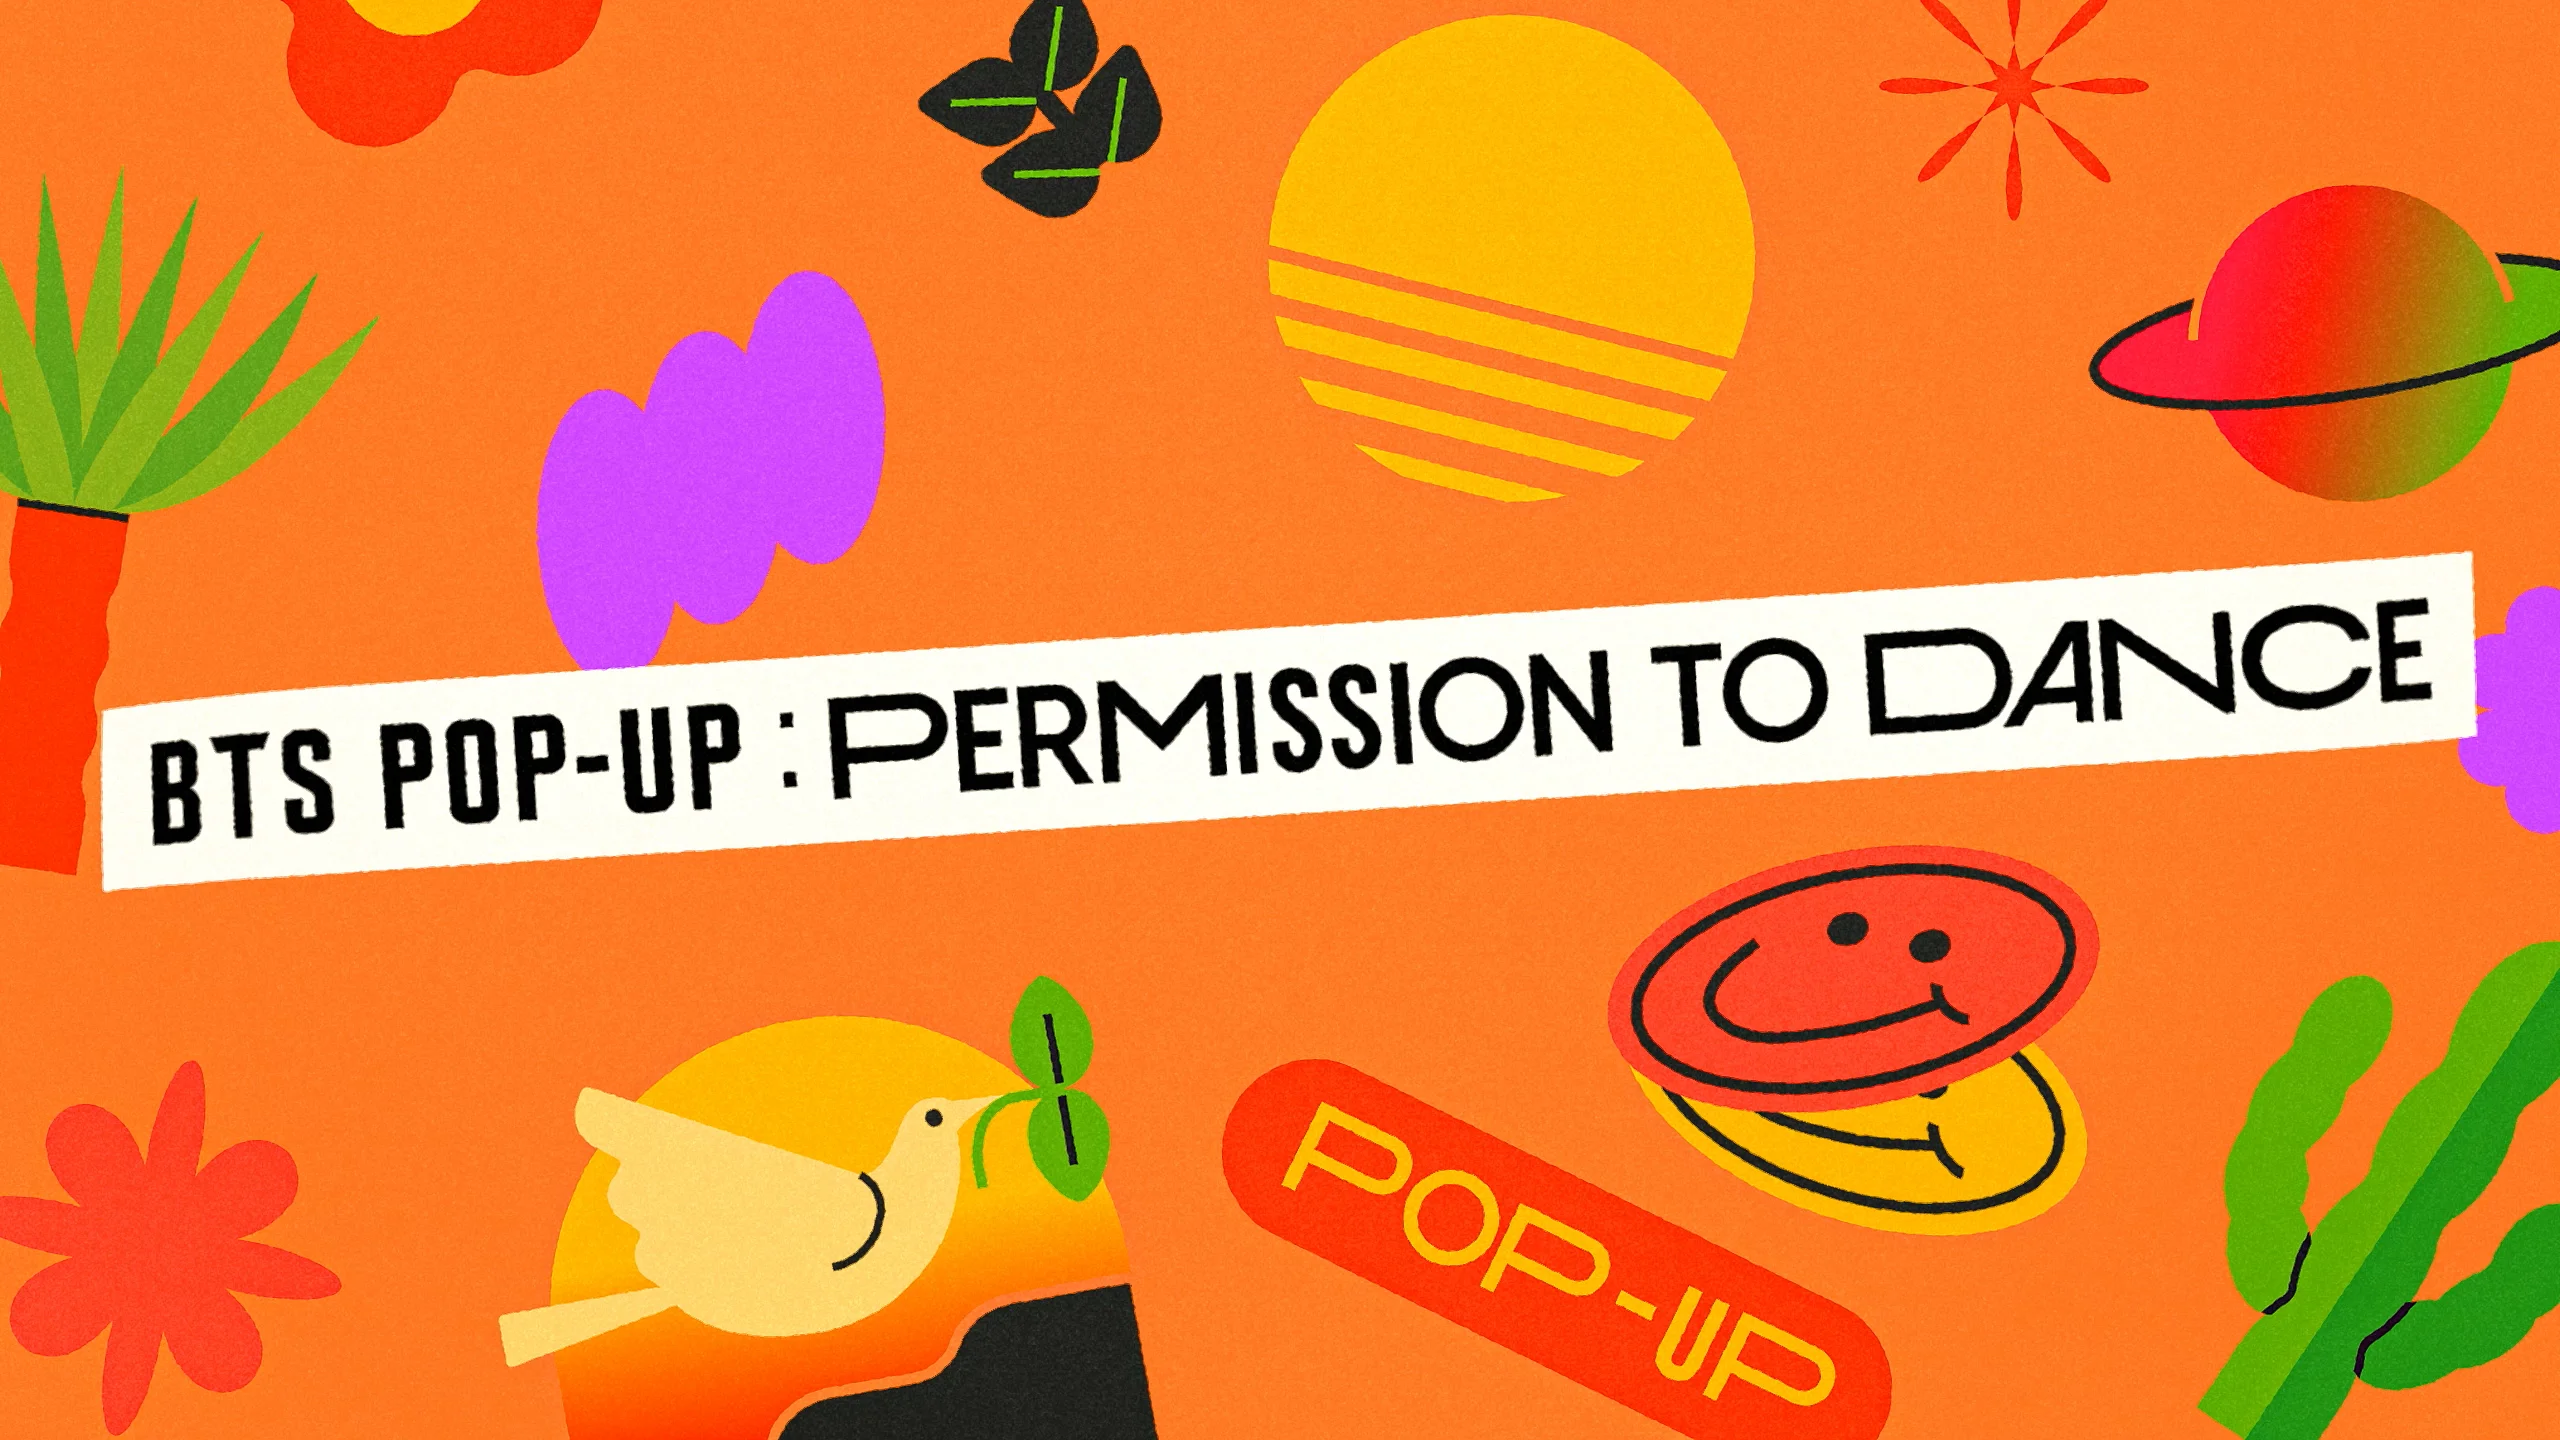 BTS POP-UP : PERMISSION TO DANCE Official Trailer on Vimeo